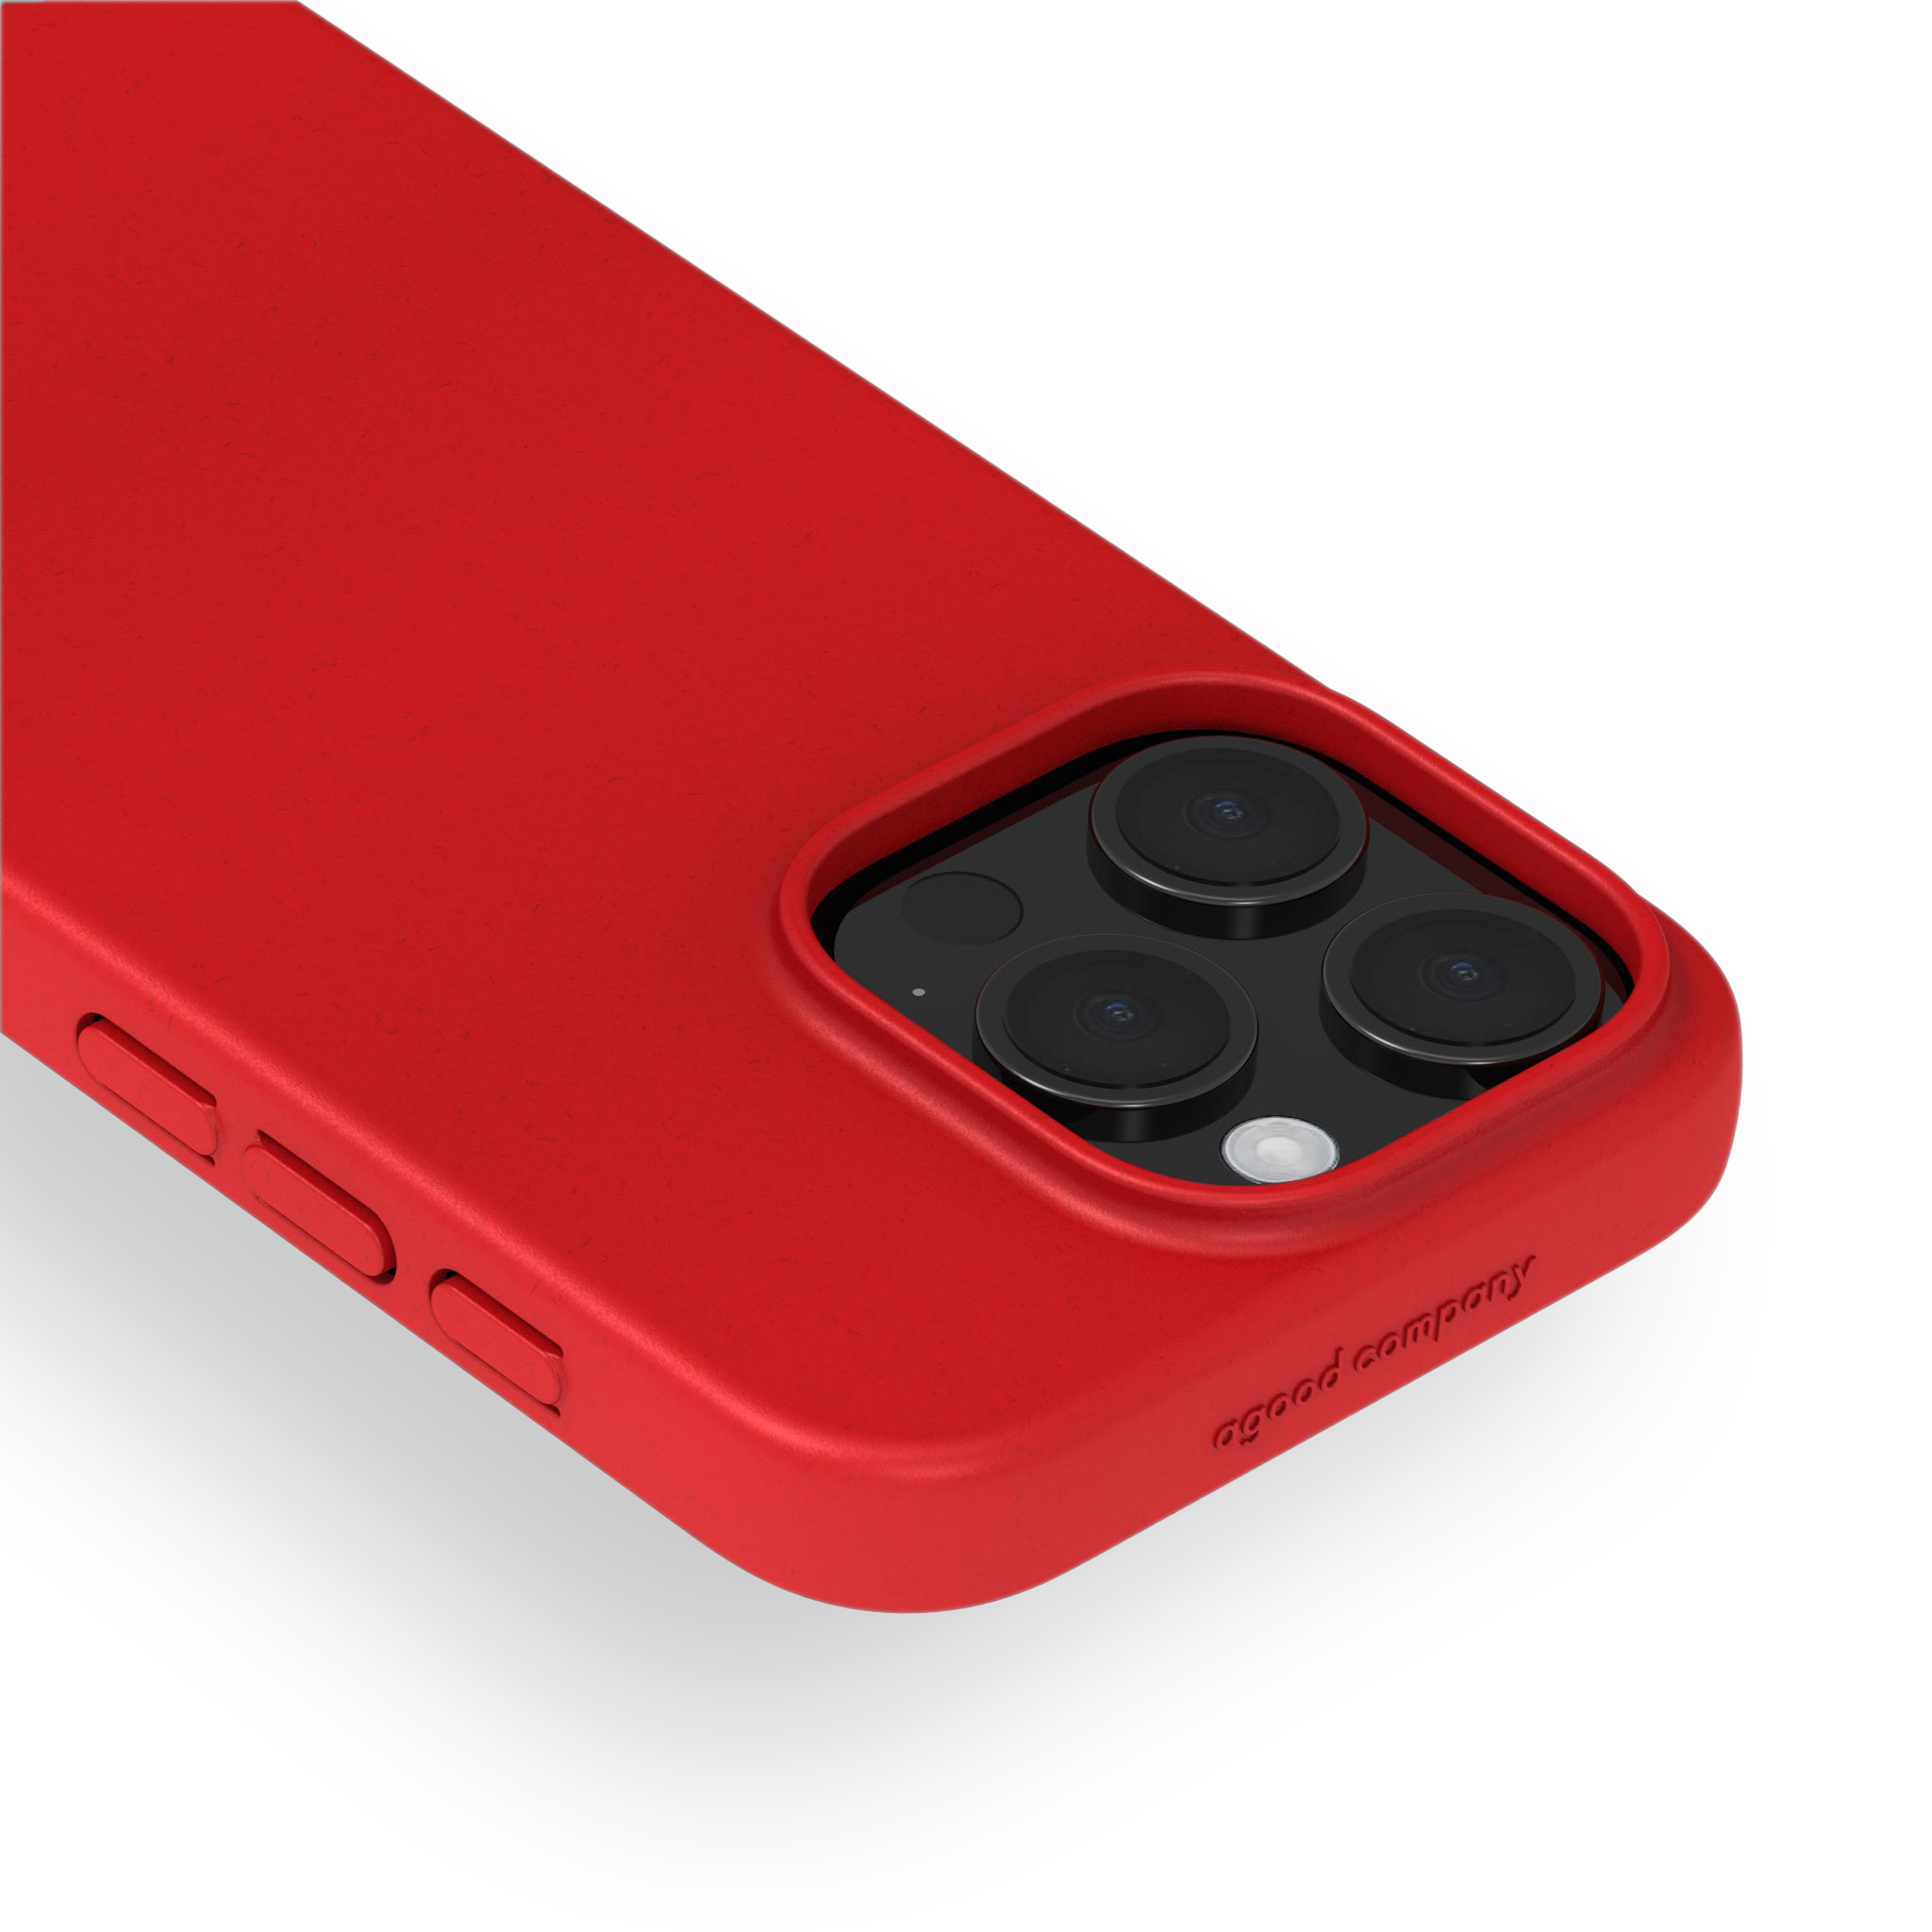 Hoesje iPhone 15 Pro Max, Red